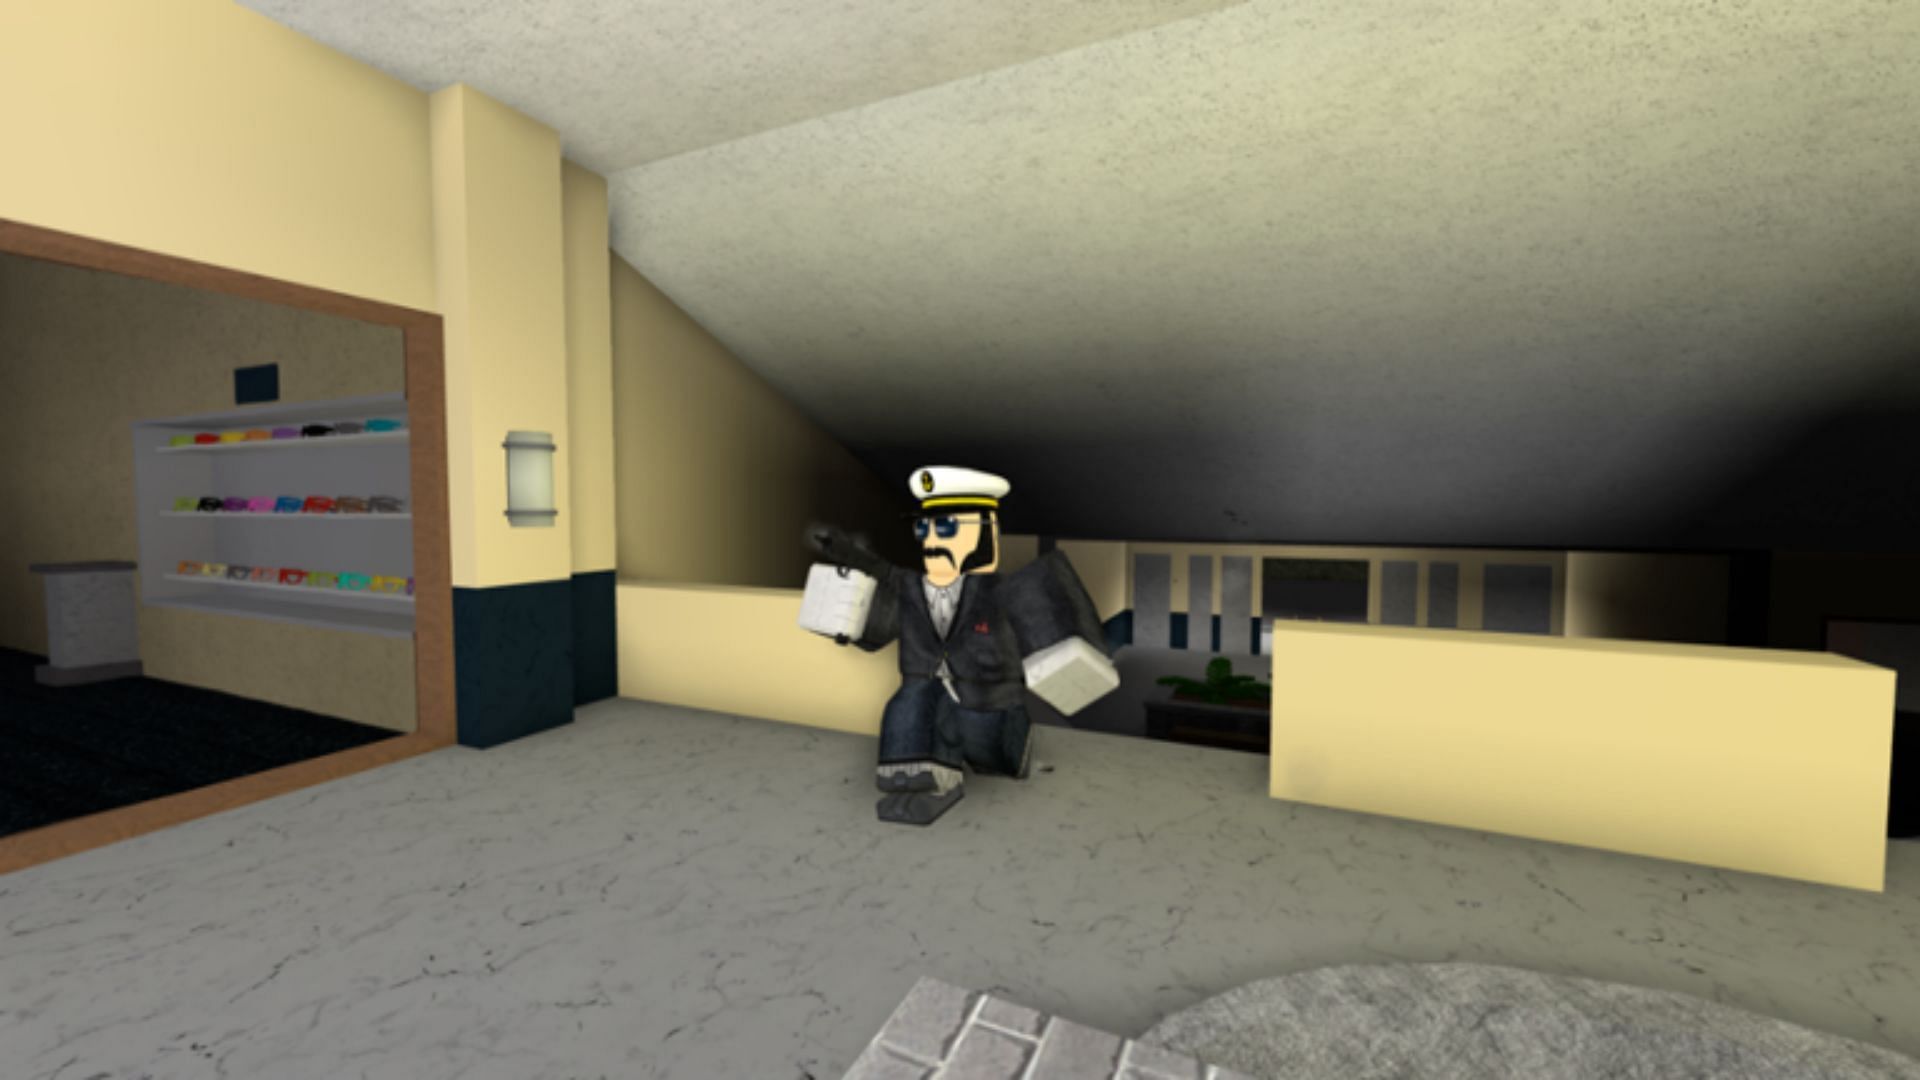 Robber by Rolve Community (image via Roblox)